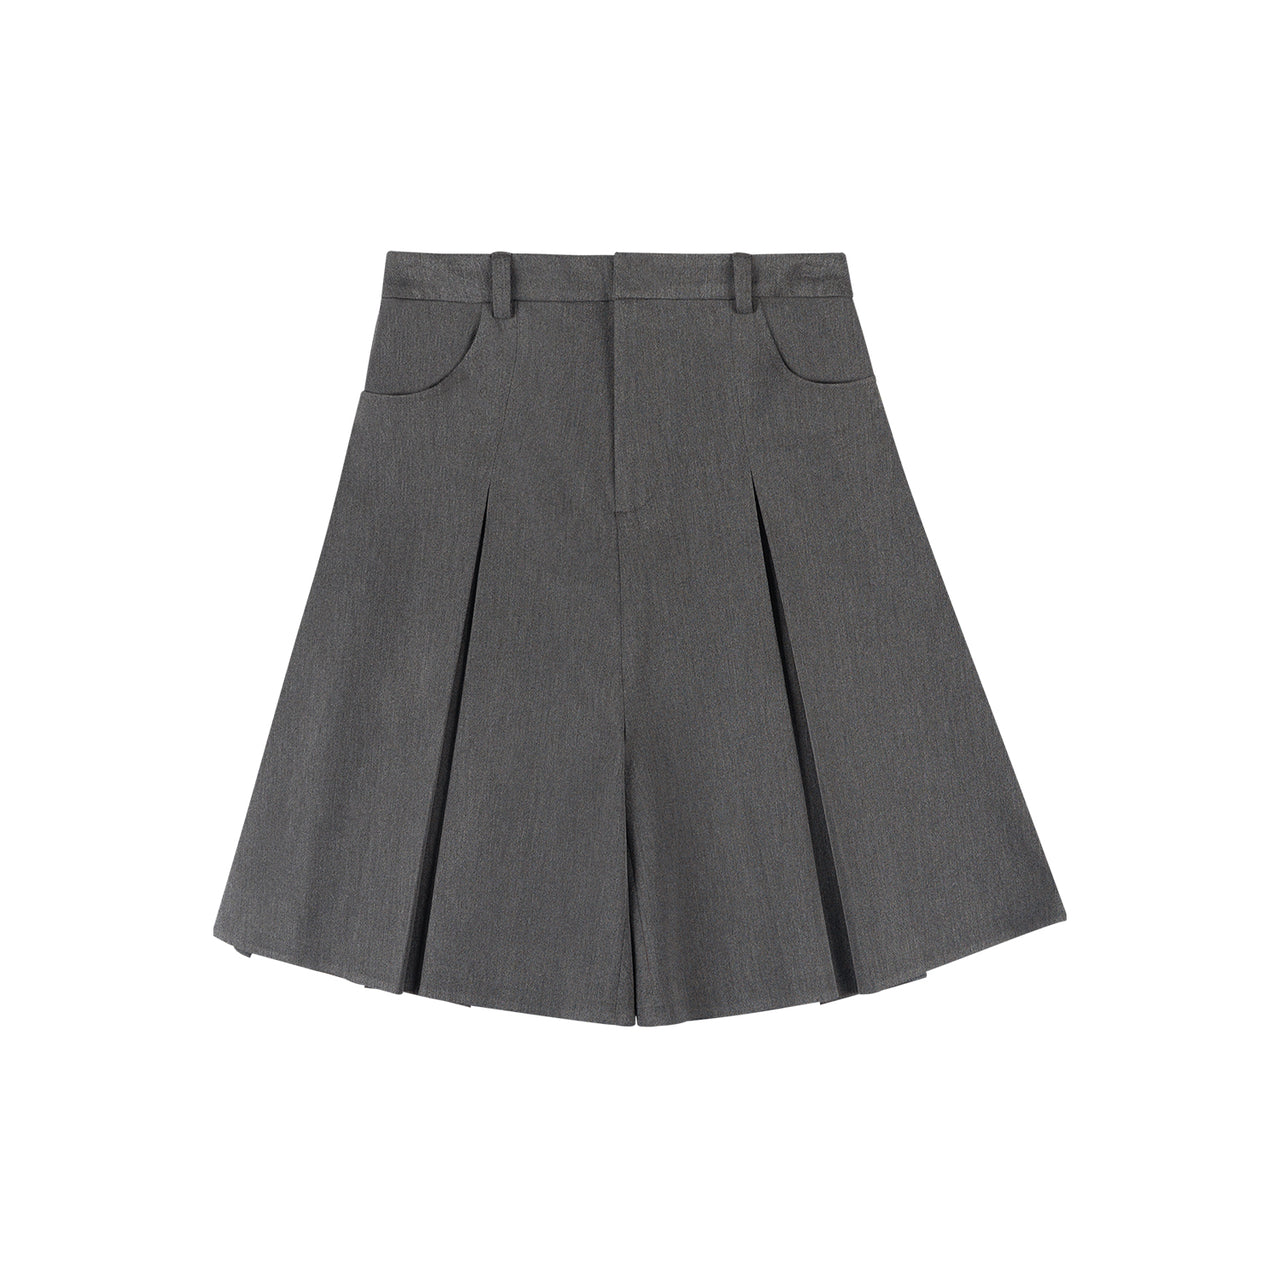 Four-Quarter With Combined Pleats Skirt - Gray / S